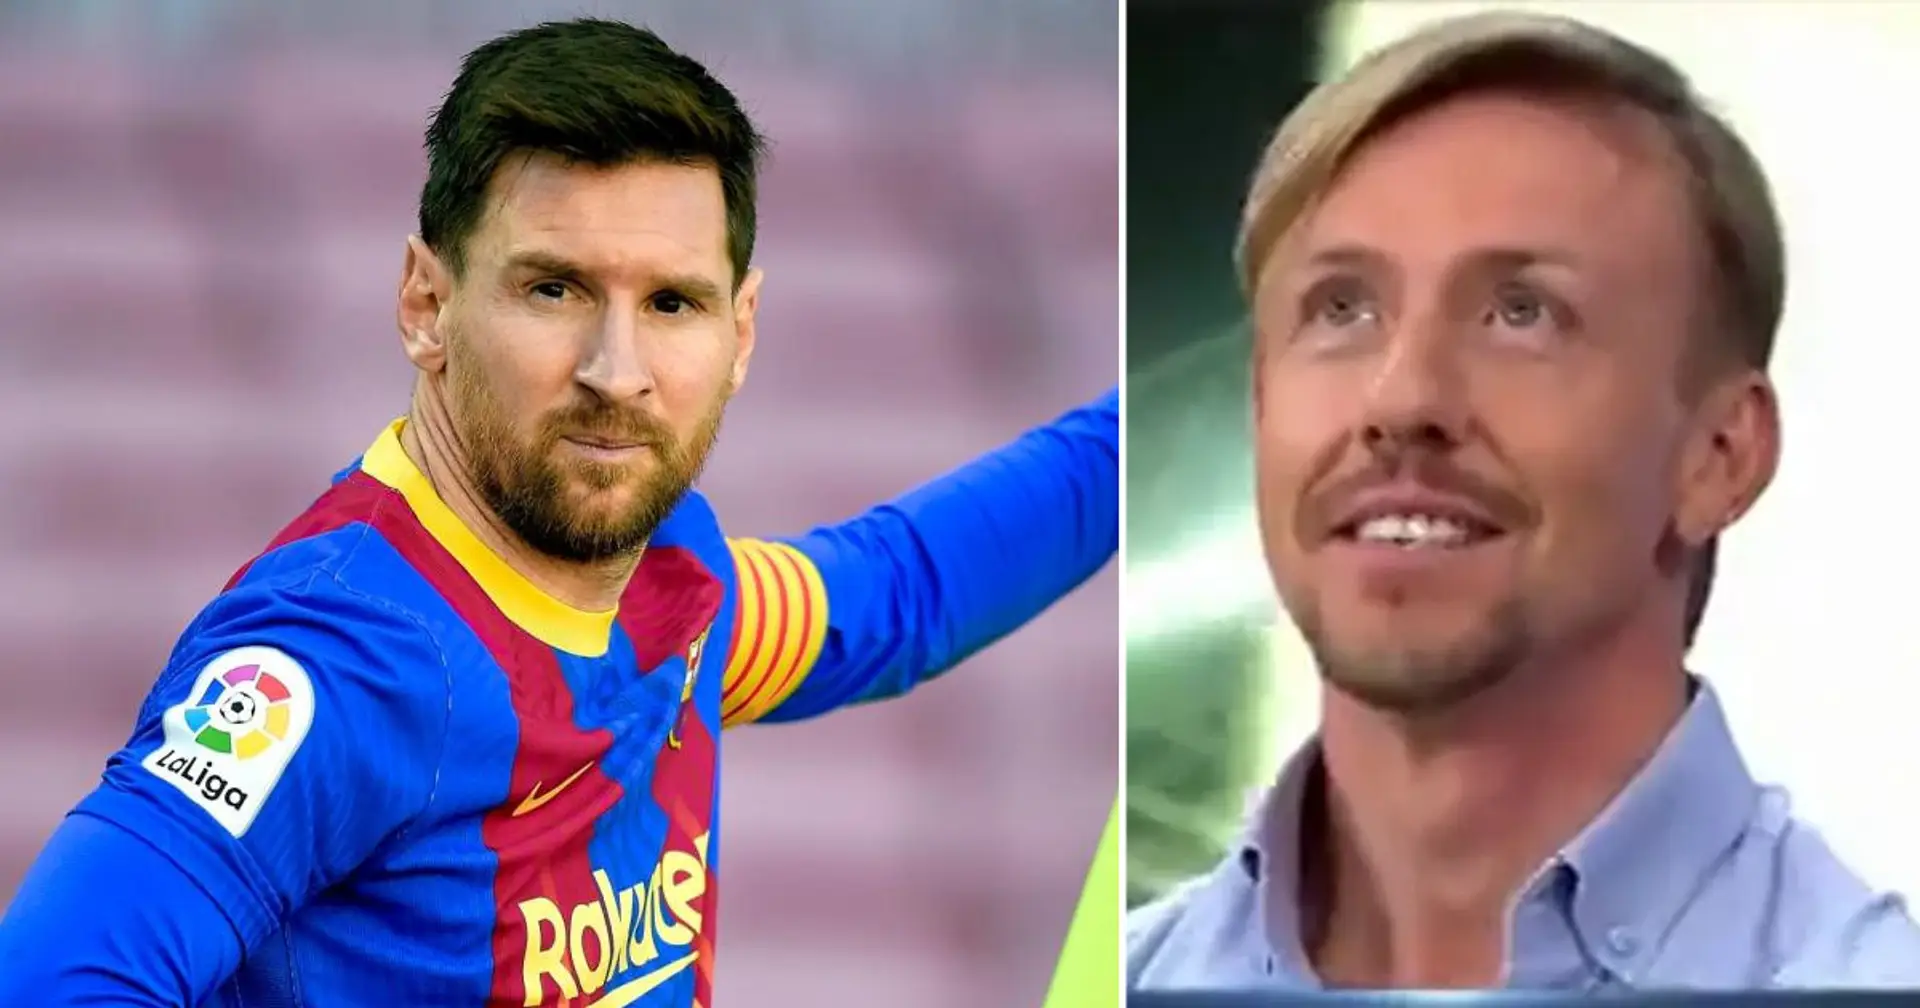 Real Madrid legend Guti names 3 iconic Blaugranas he would've liked to play with